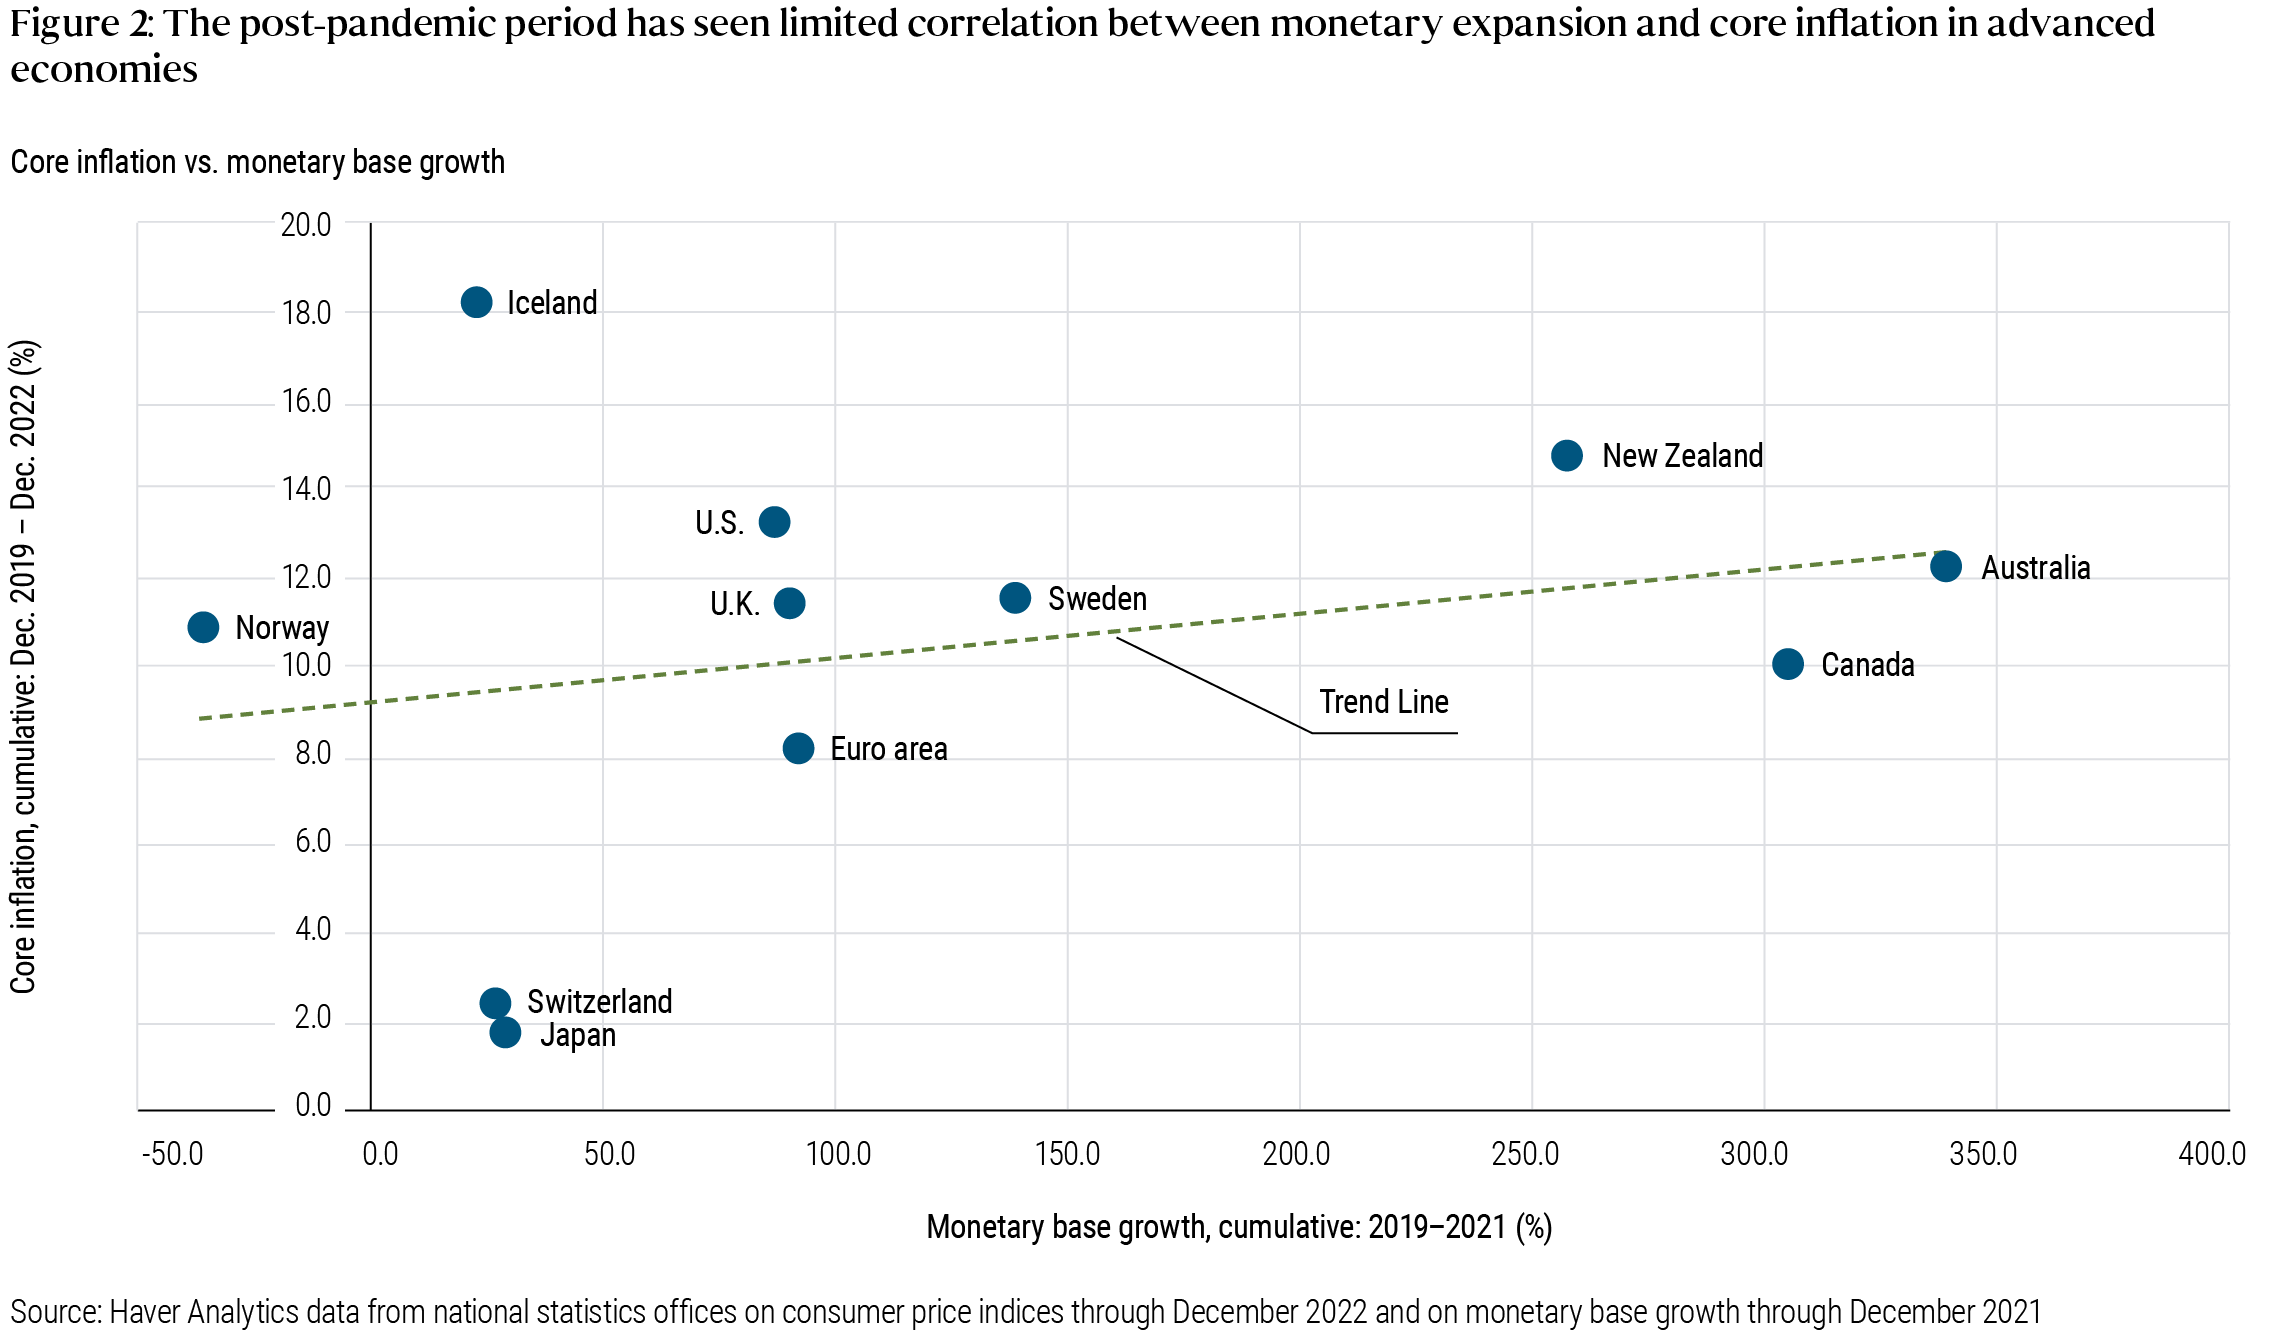 Figure 2 is a scatter chart that includes the same countries and the same data on inflation (core CPI) as Figure 1, plotted against the growth in the monetary base (driven by central bank activity). As described in the preceding paragraph, the overall trend shows only limited correlation between monetary expansion and core inflation. The U.S., for example, saw cumulative core CPI inflation from Dec. 2019 – Dec. 2022 of above 13% and cumulative monetary base expansion of about 80% between 2019 and 2021. Australia, by contrast, saw inflation above 12% while its monetary base expanded around 340% over the same time frame. Data source is Haver Analytics data from national statistics offices on consumer price indices through December 2022 and on monetary base growth through December 2021.